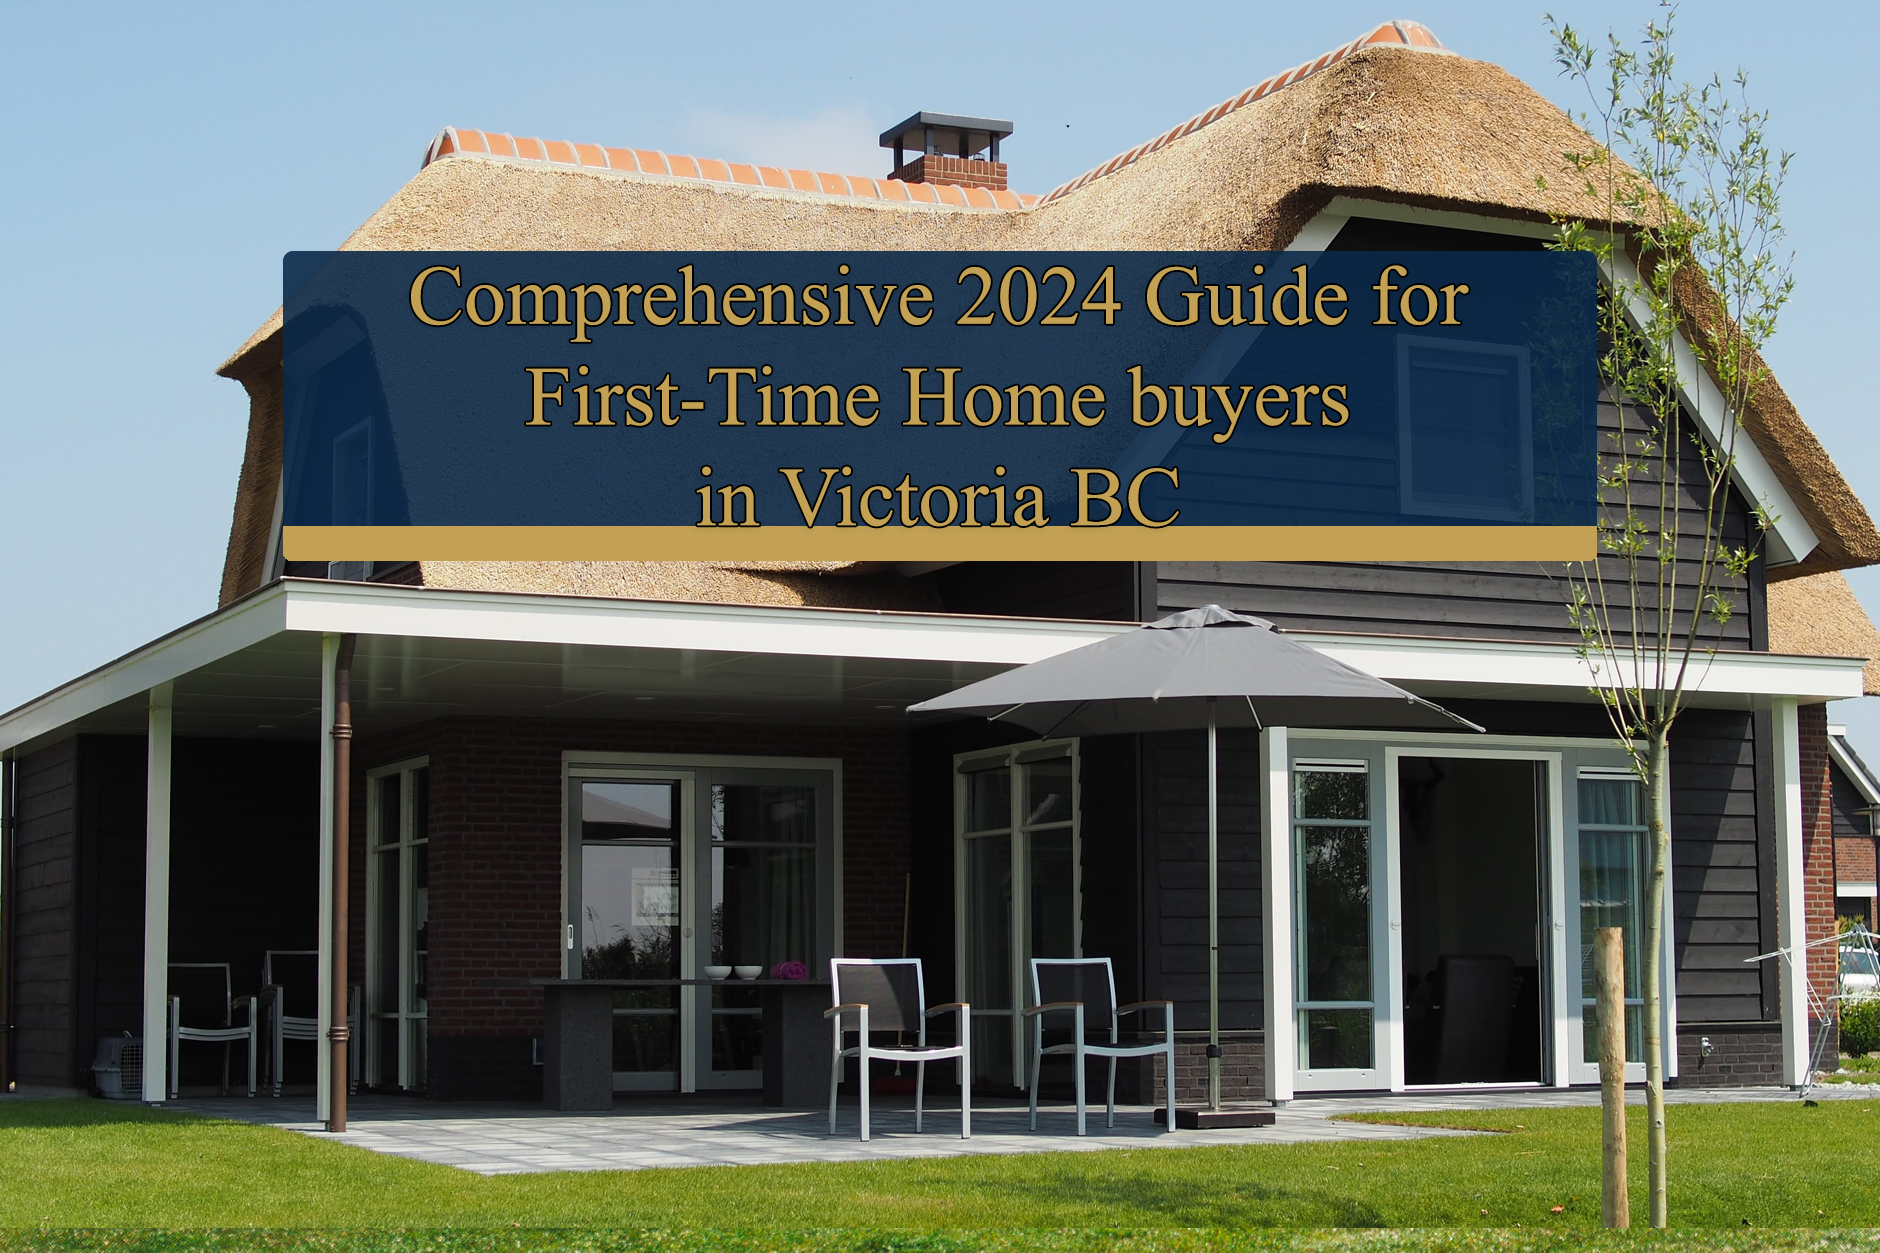 2024 guide for first-time homebuyers in Victoria BC